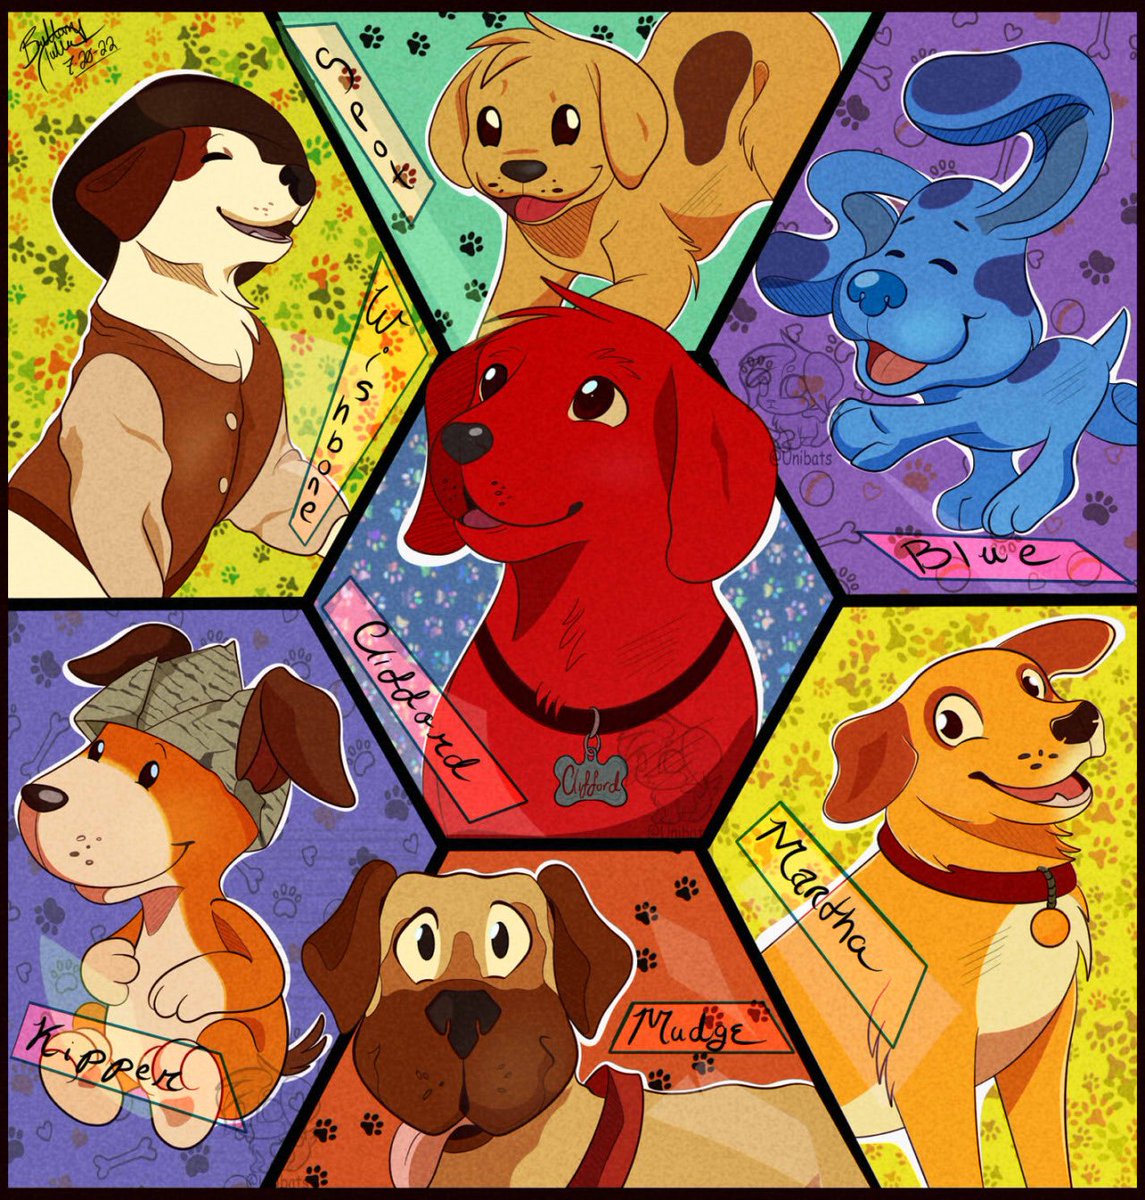 Preschool Pups~ 🦴🐾
Oh the atomic nostalgia bomb this piece set off 2 years ago. 

These guys made reading, learning, and just plain growing up, fun! :)

#clifford #wishbone #marthaspeaks #bluesclues #henryandmudge #spot #kipper #fanart